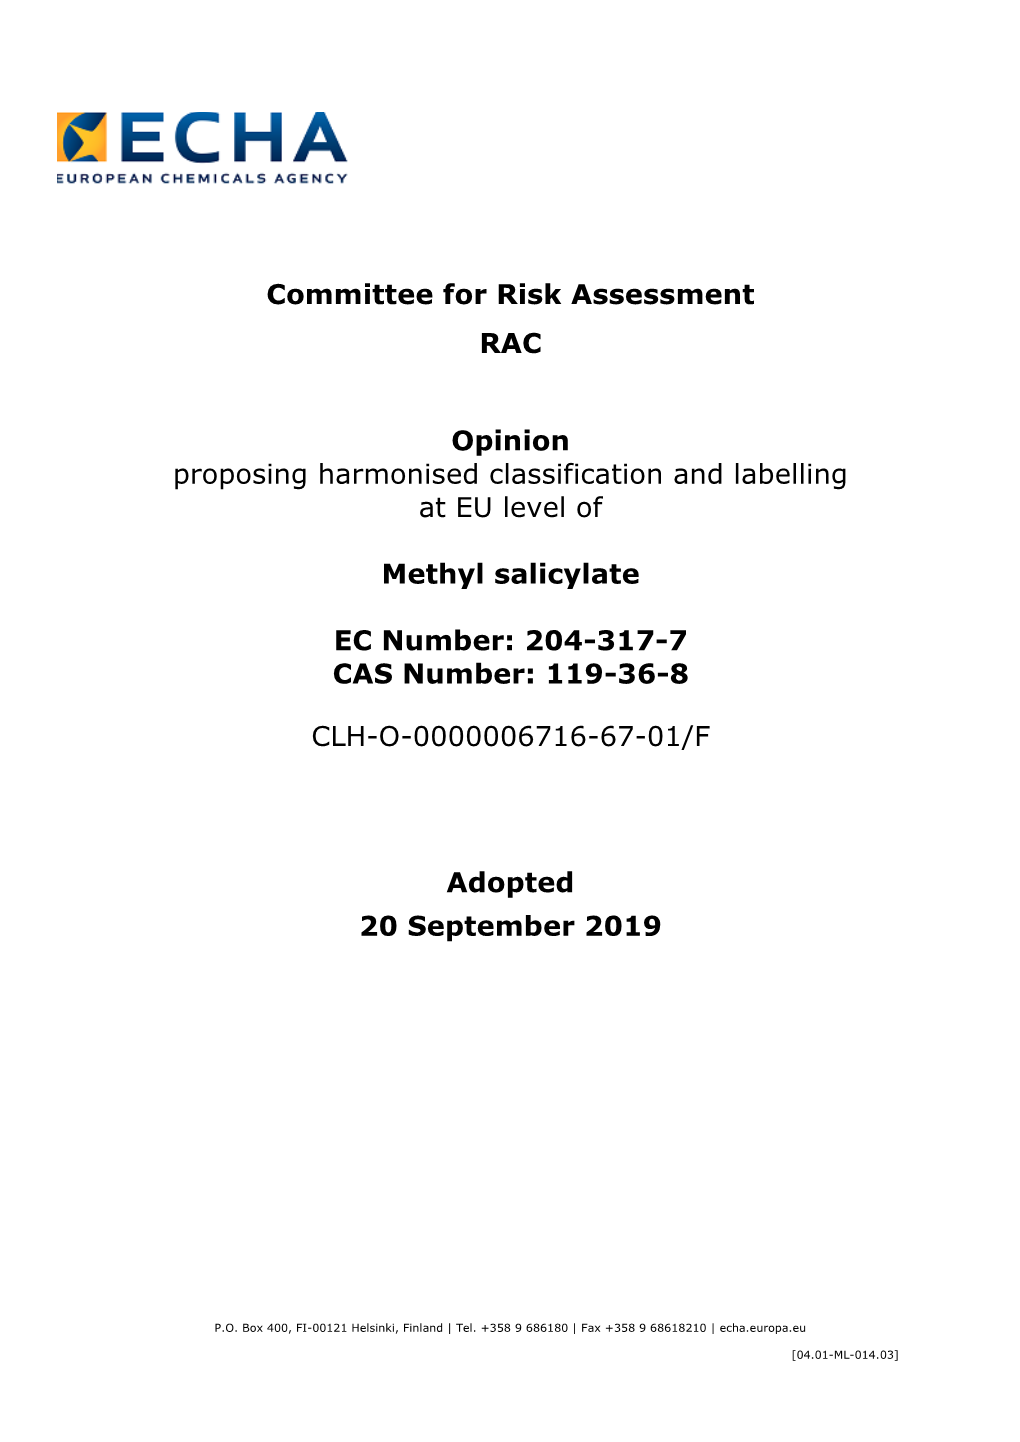 Committee for Risk Assessment RAC Opinion Proposing Harmonised Classification and Labelling at EU Level of Methyl Salicylate EC